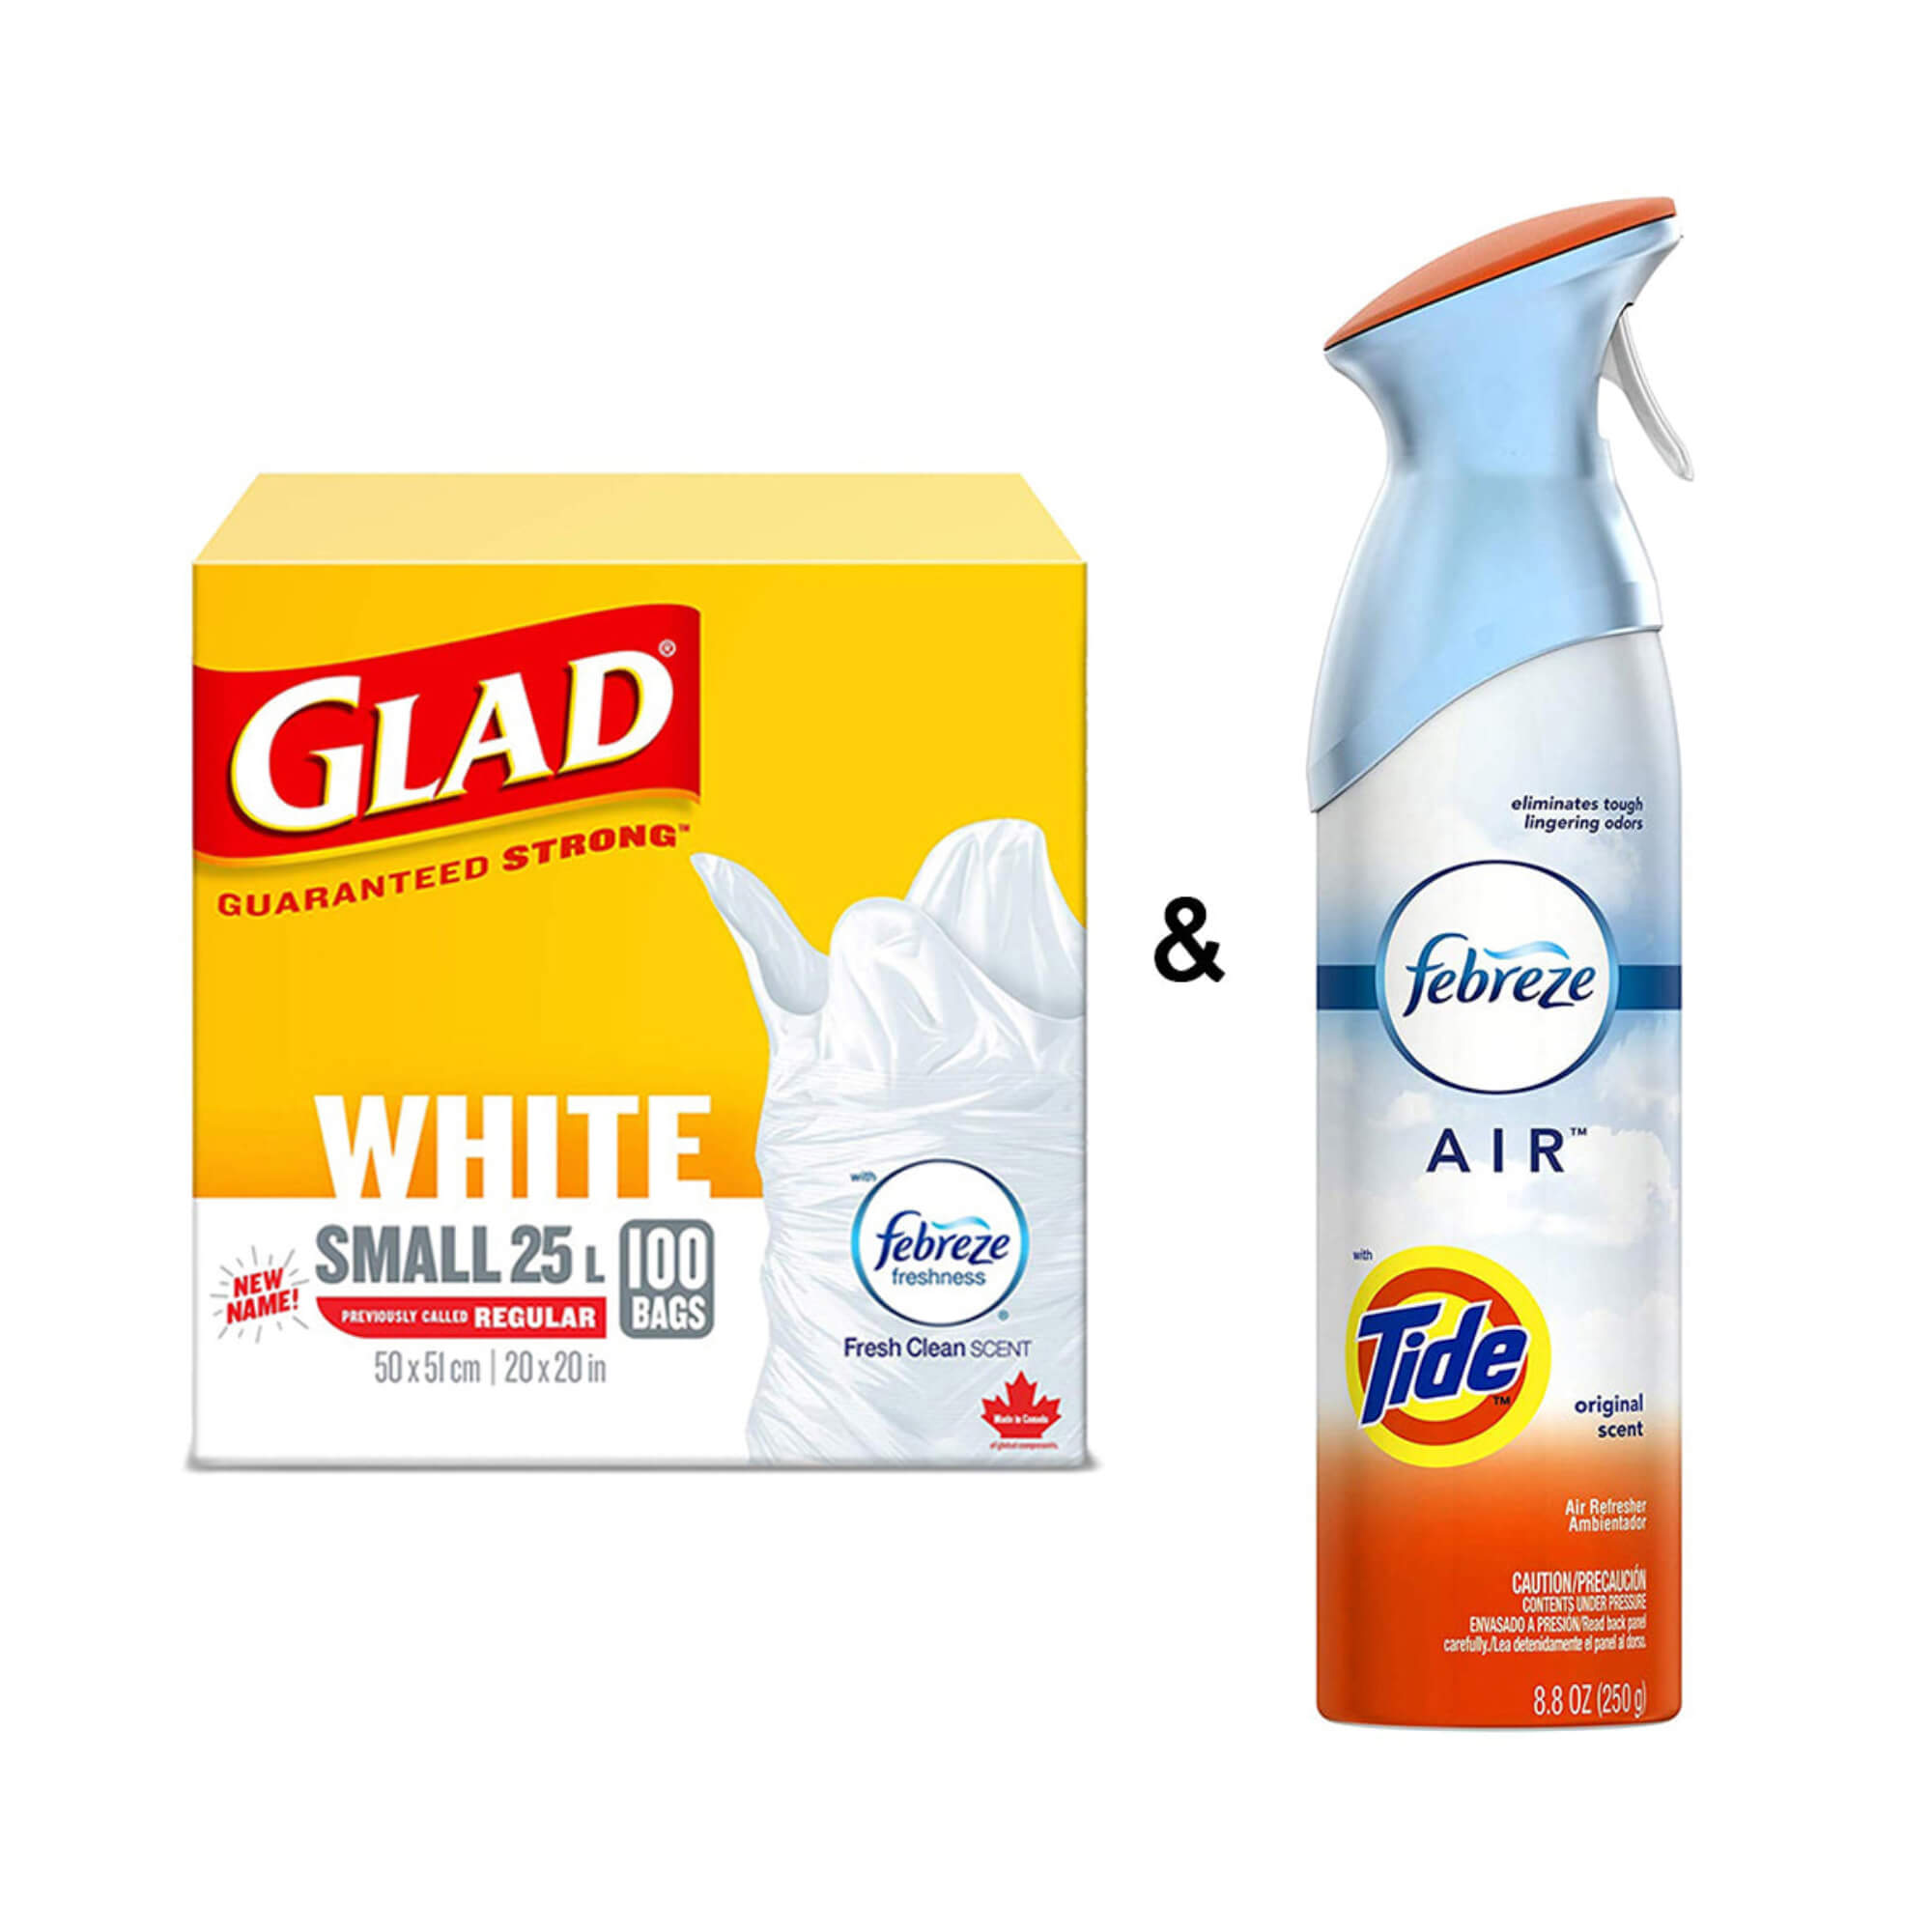 Air Freshener & Glad White Garbage - Small 25 L - 24 Bags